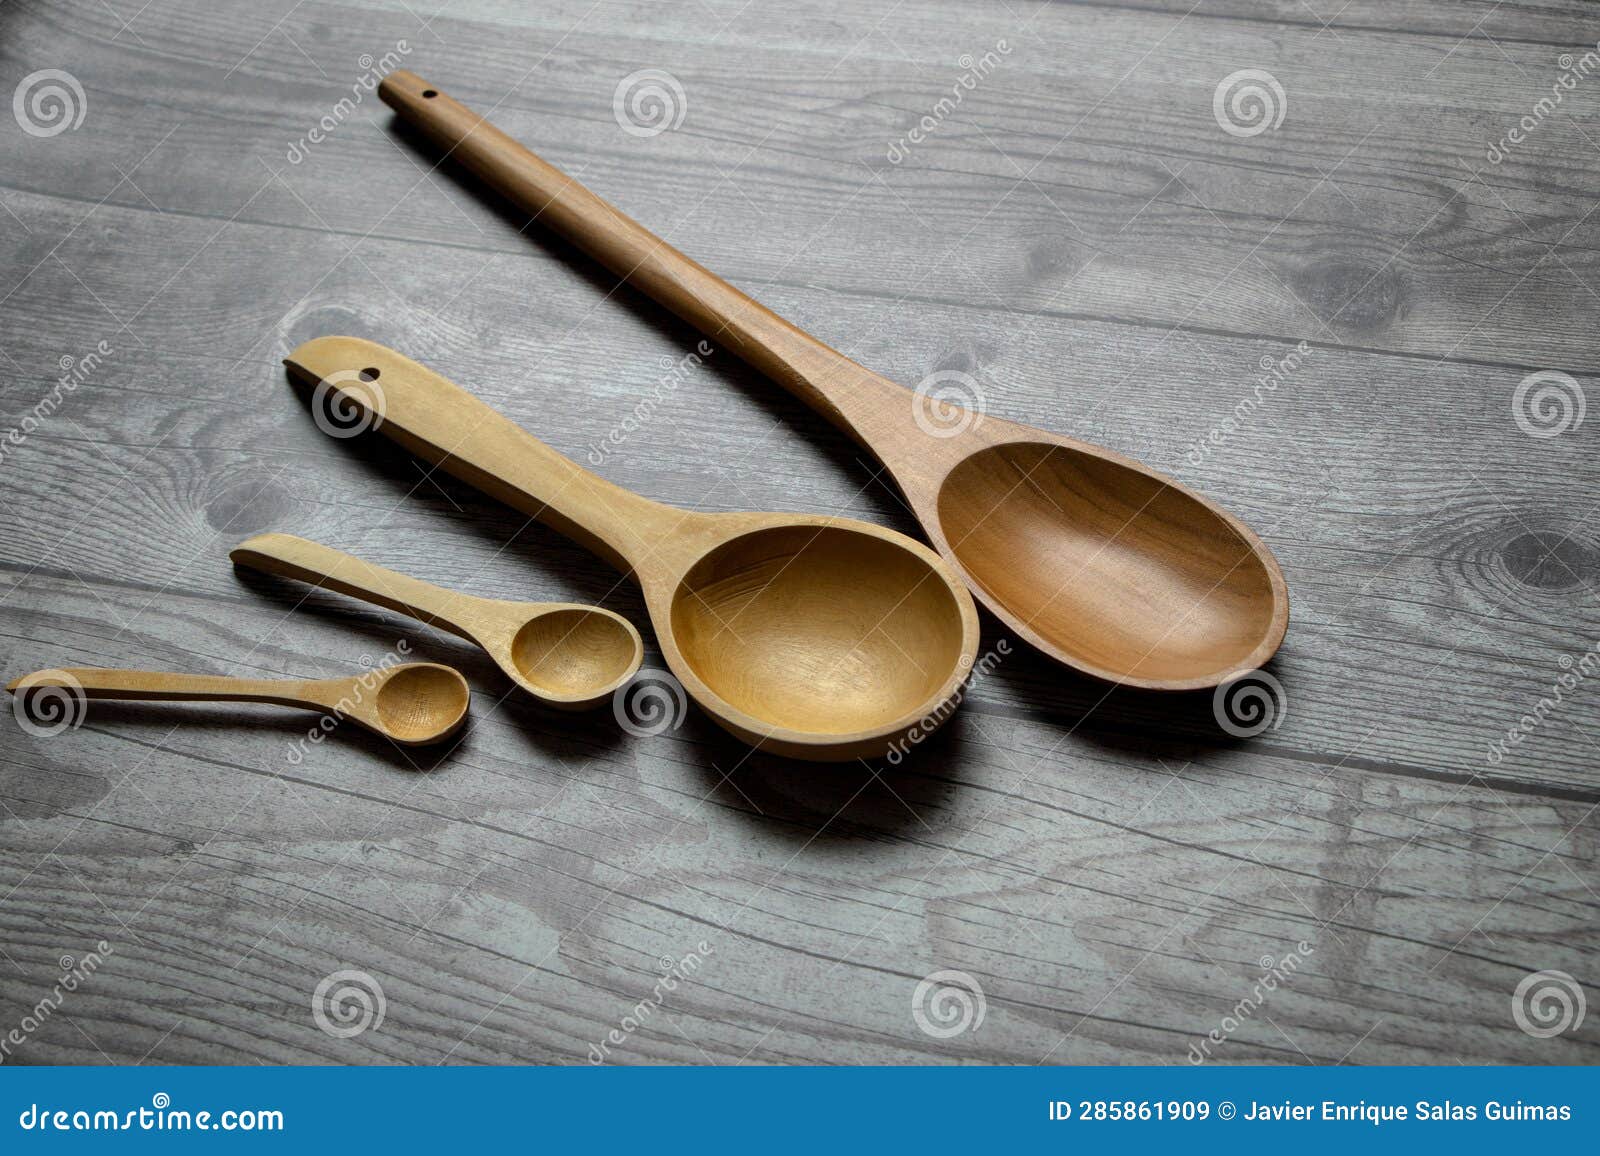 wooden spoons on a rustic table